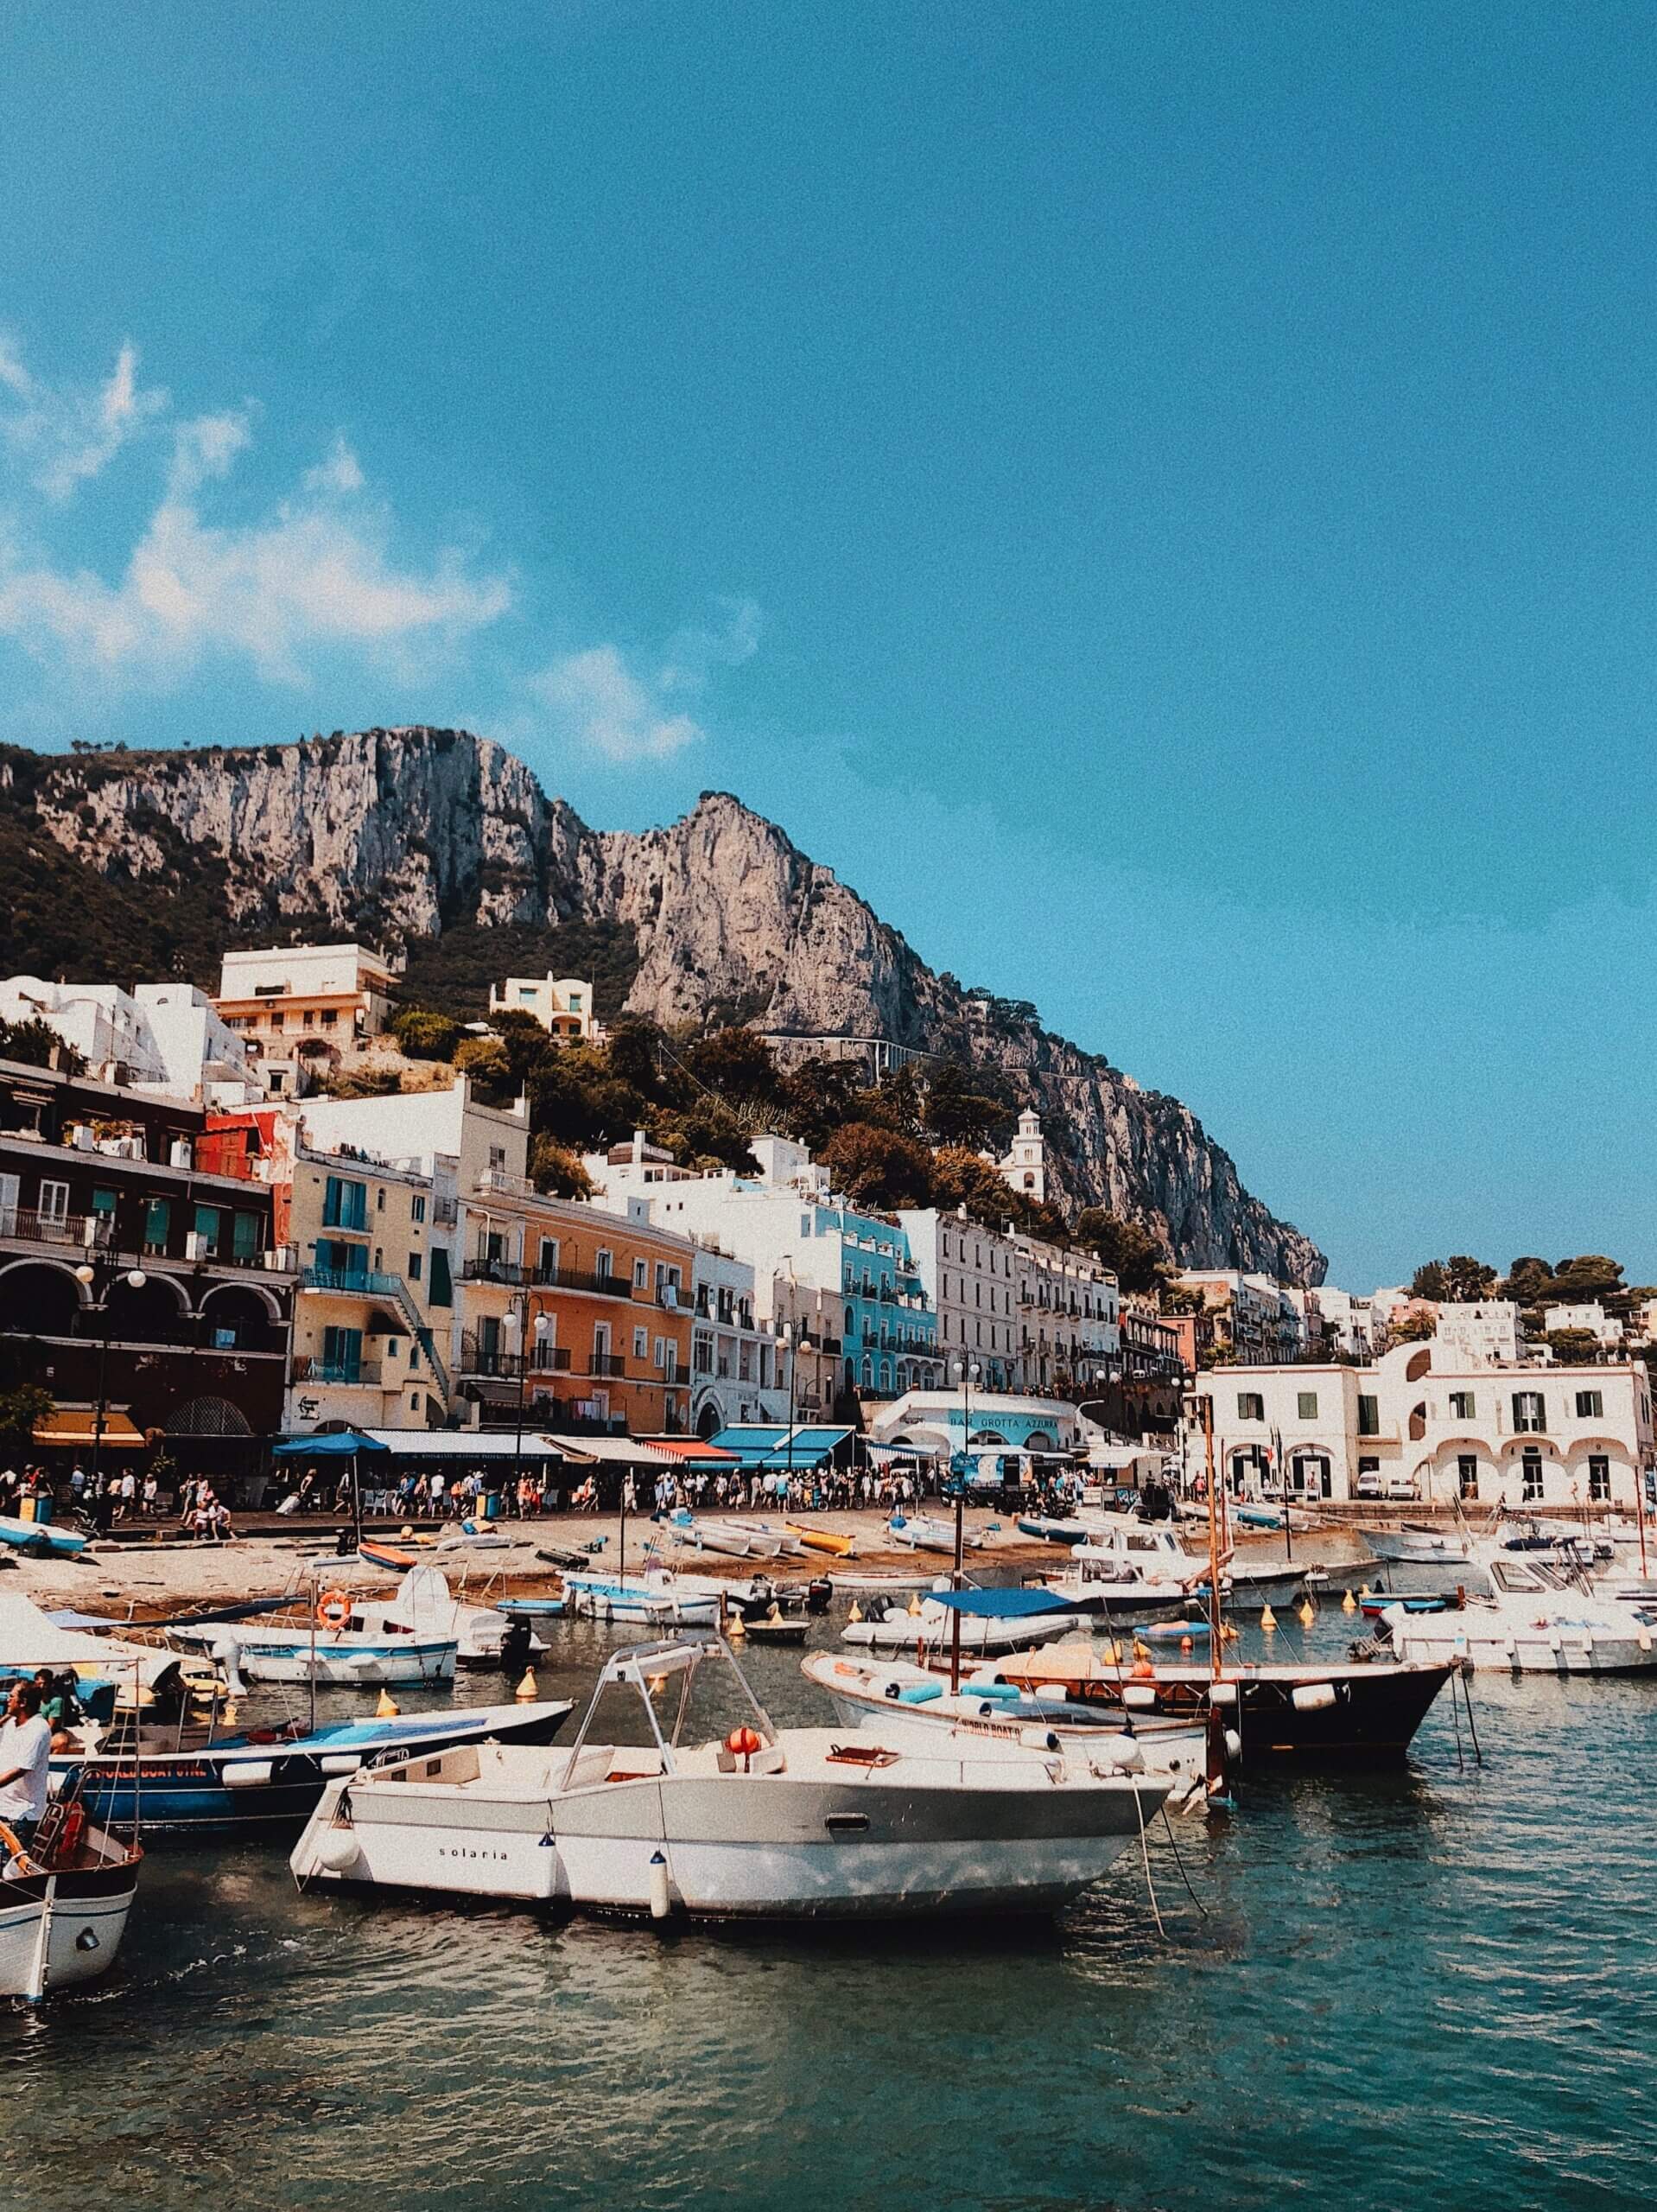 Plus Size Friendly Tips for Visiting the Amalfi Coast